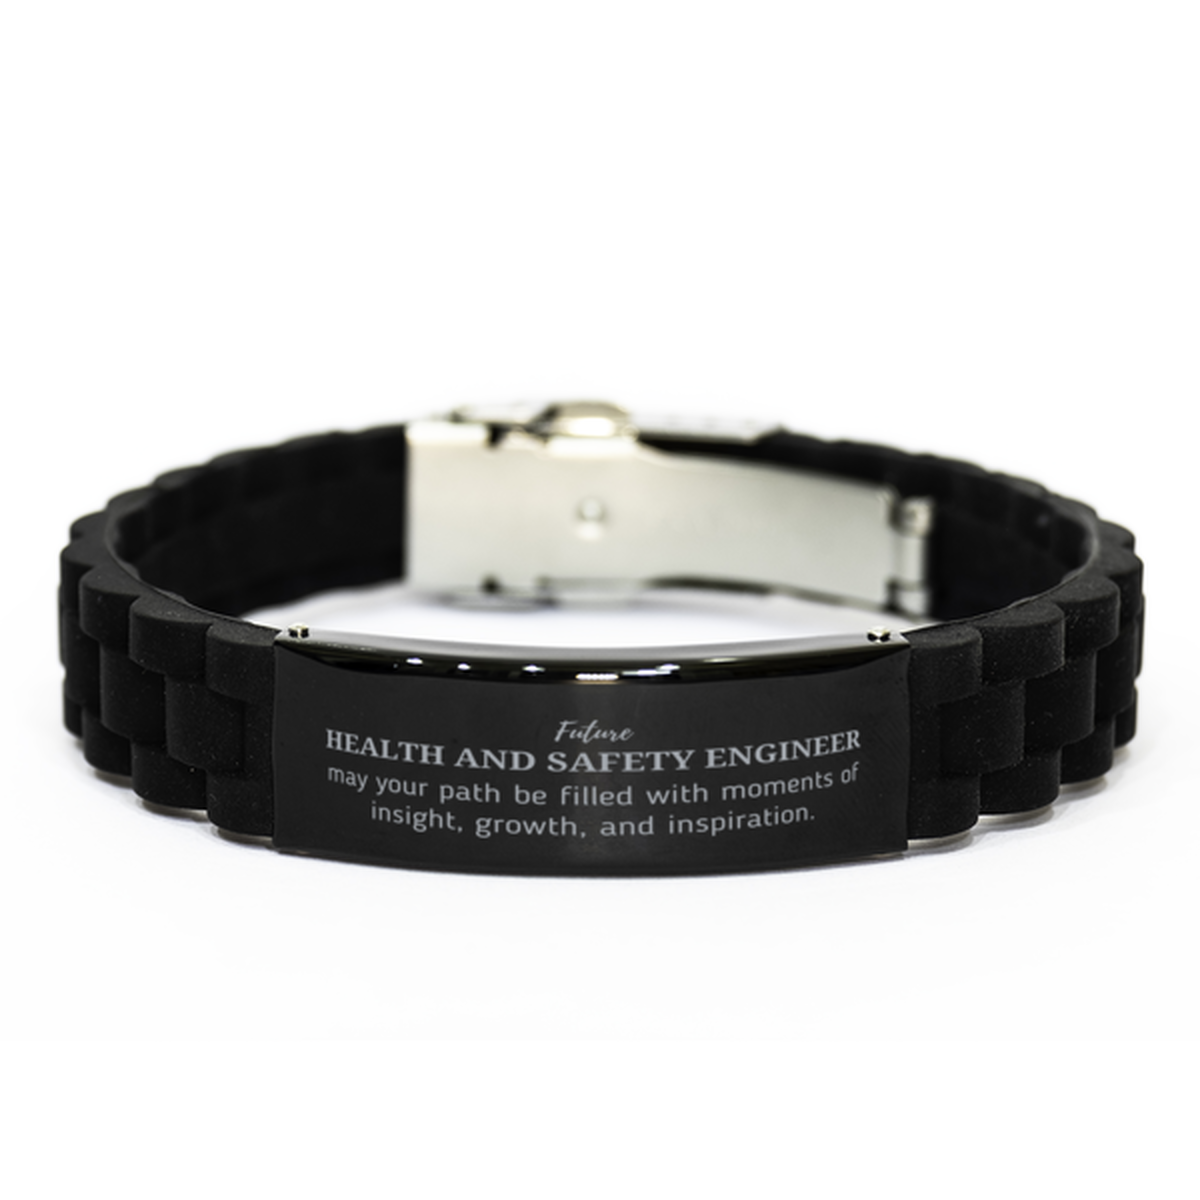 Future Health and Safety Engineer Gifts, May your path be filled with moments of insight, Graduation Gifts for New Health and Safety Engineer, Christmas Unique Black Glidelock Clasp Bracelet For Men, Women, Friends